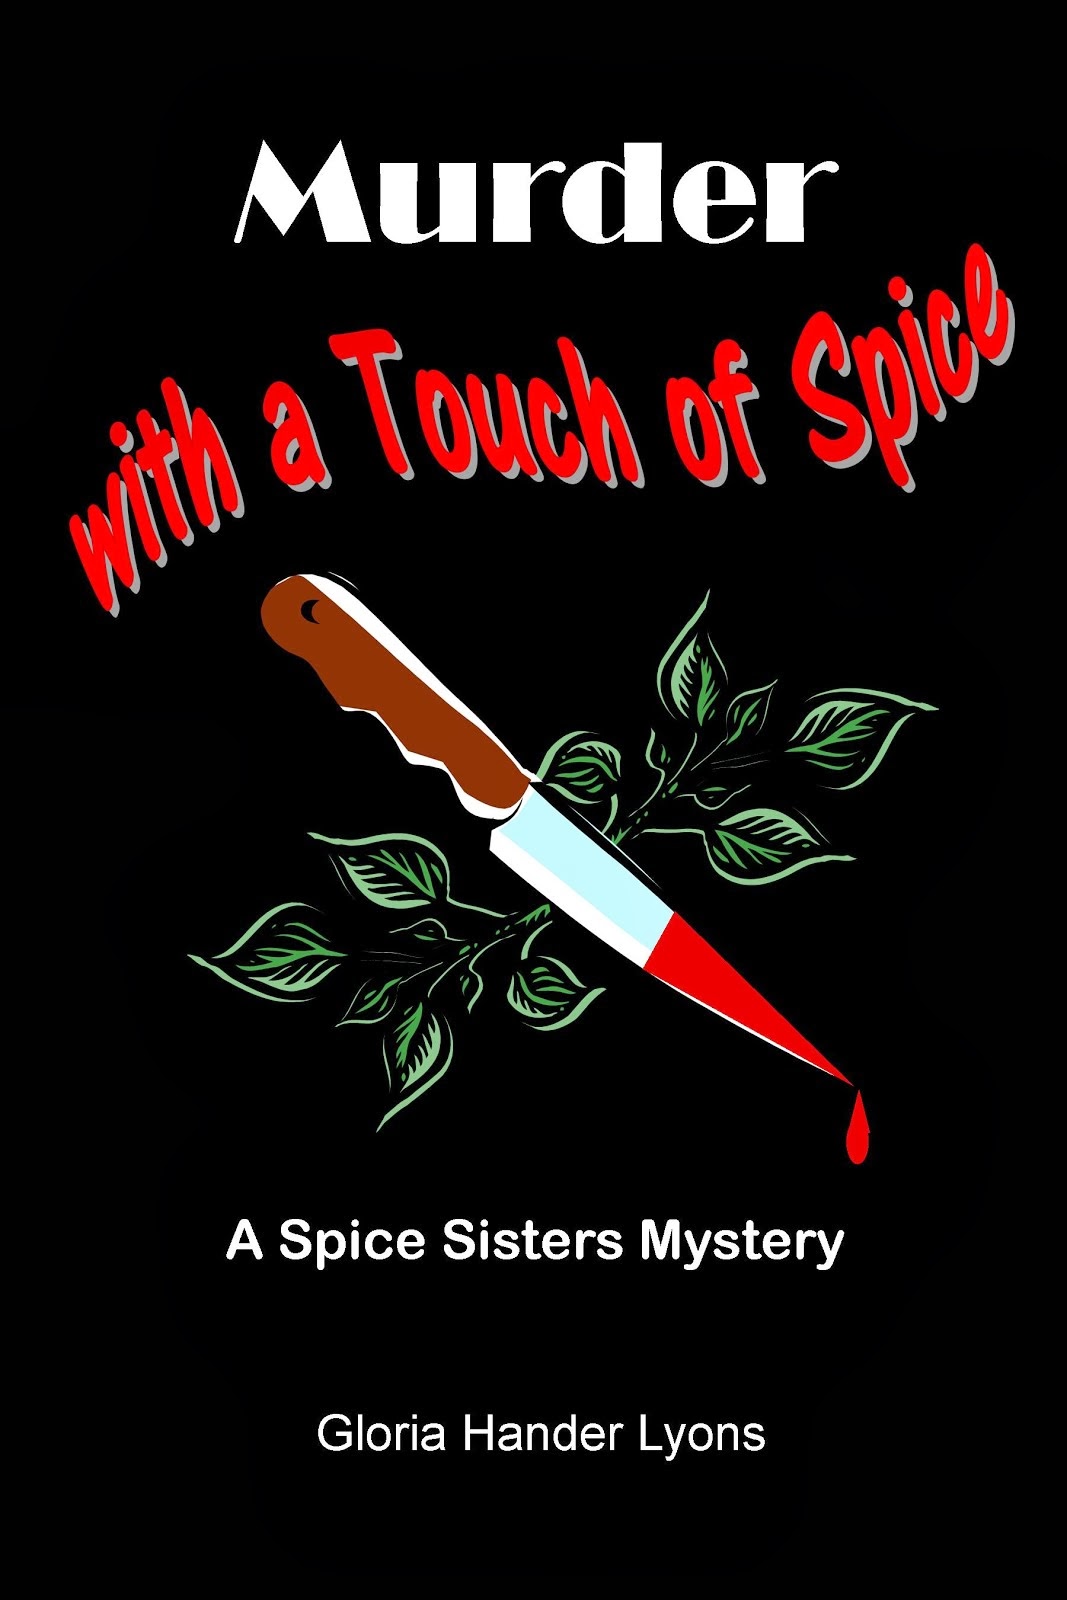 Murder with a Touch of Spice